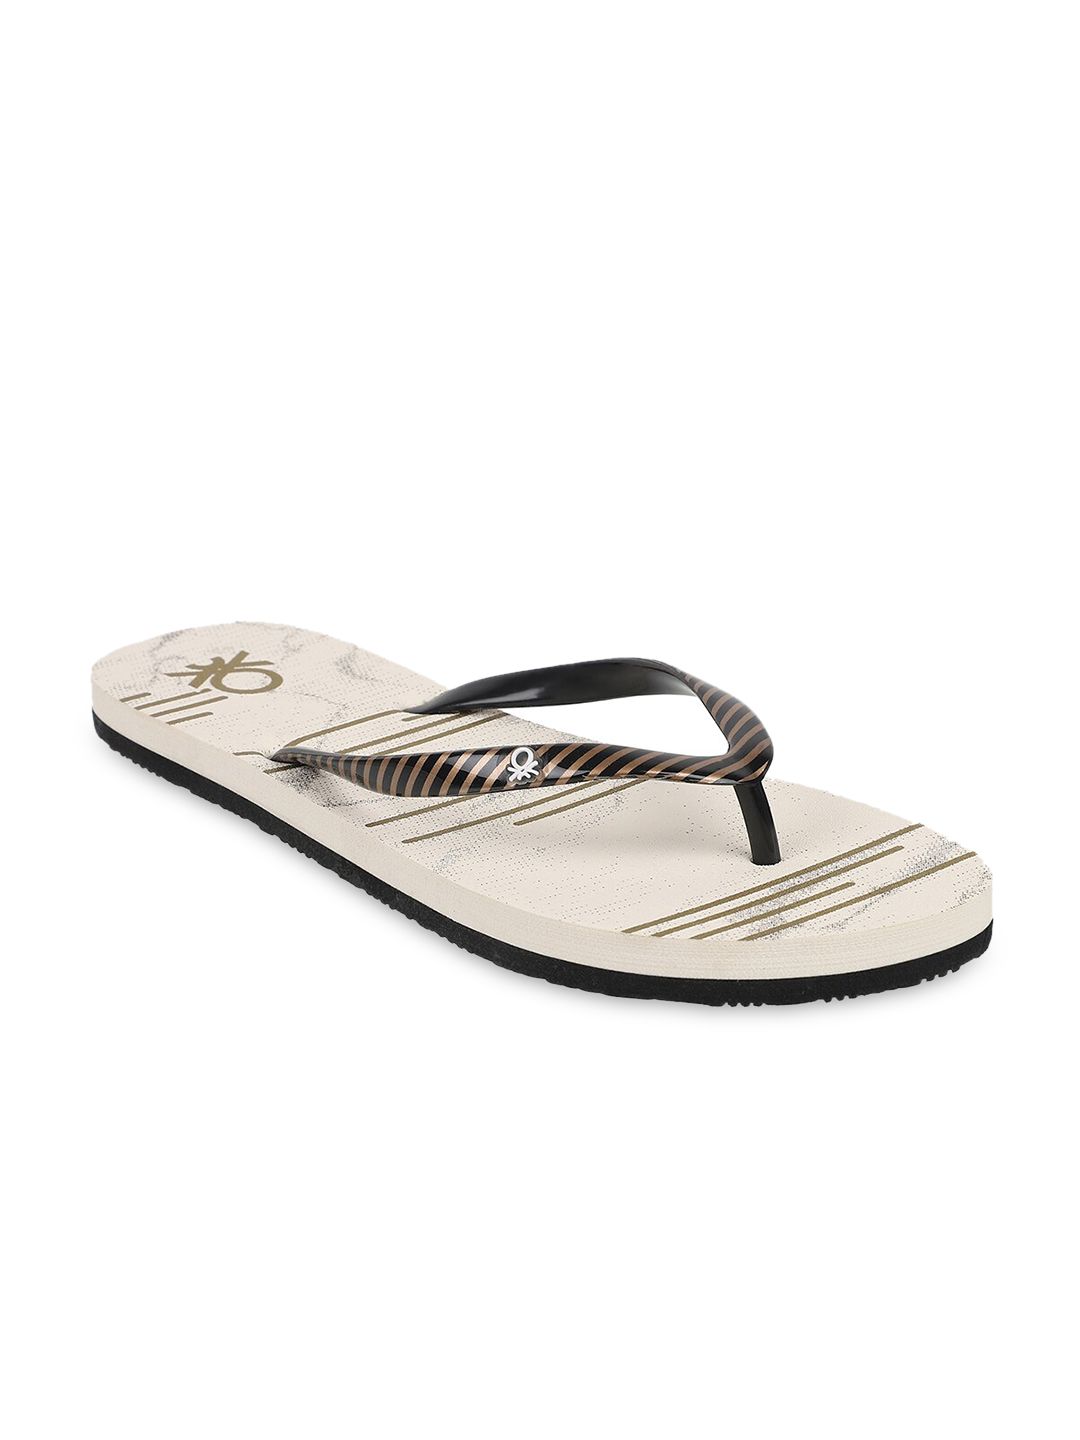 United Colors of Benetton Women Beige & Black Printed Rubber Thong Flip-Flops Price in India